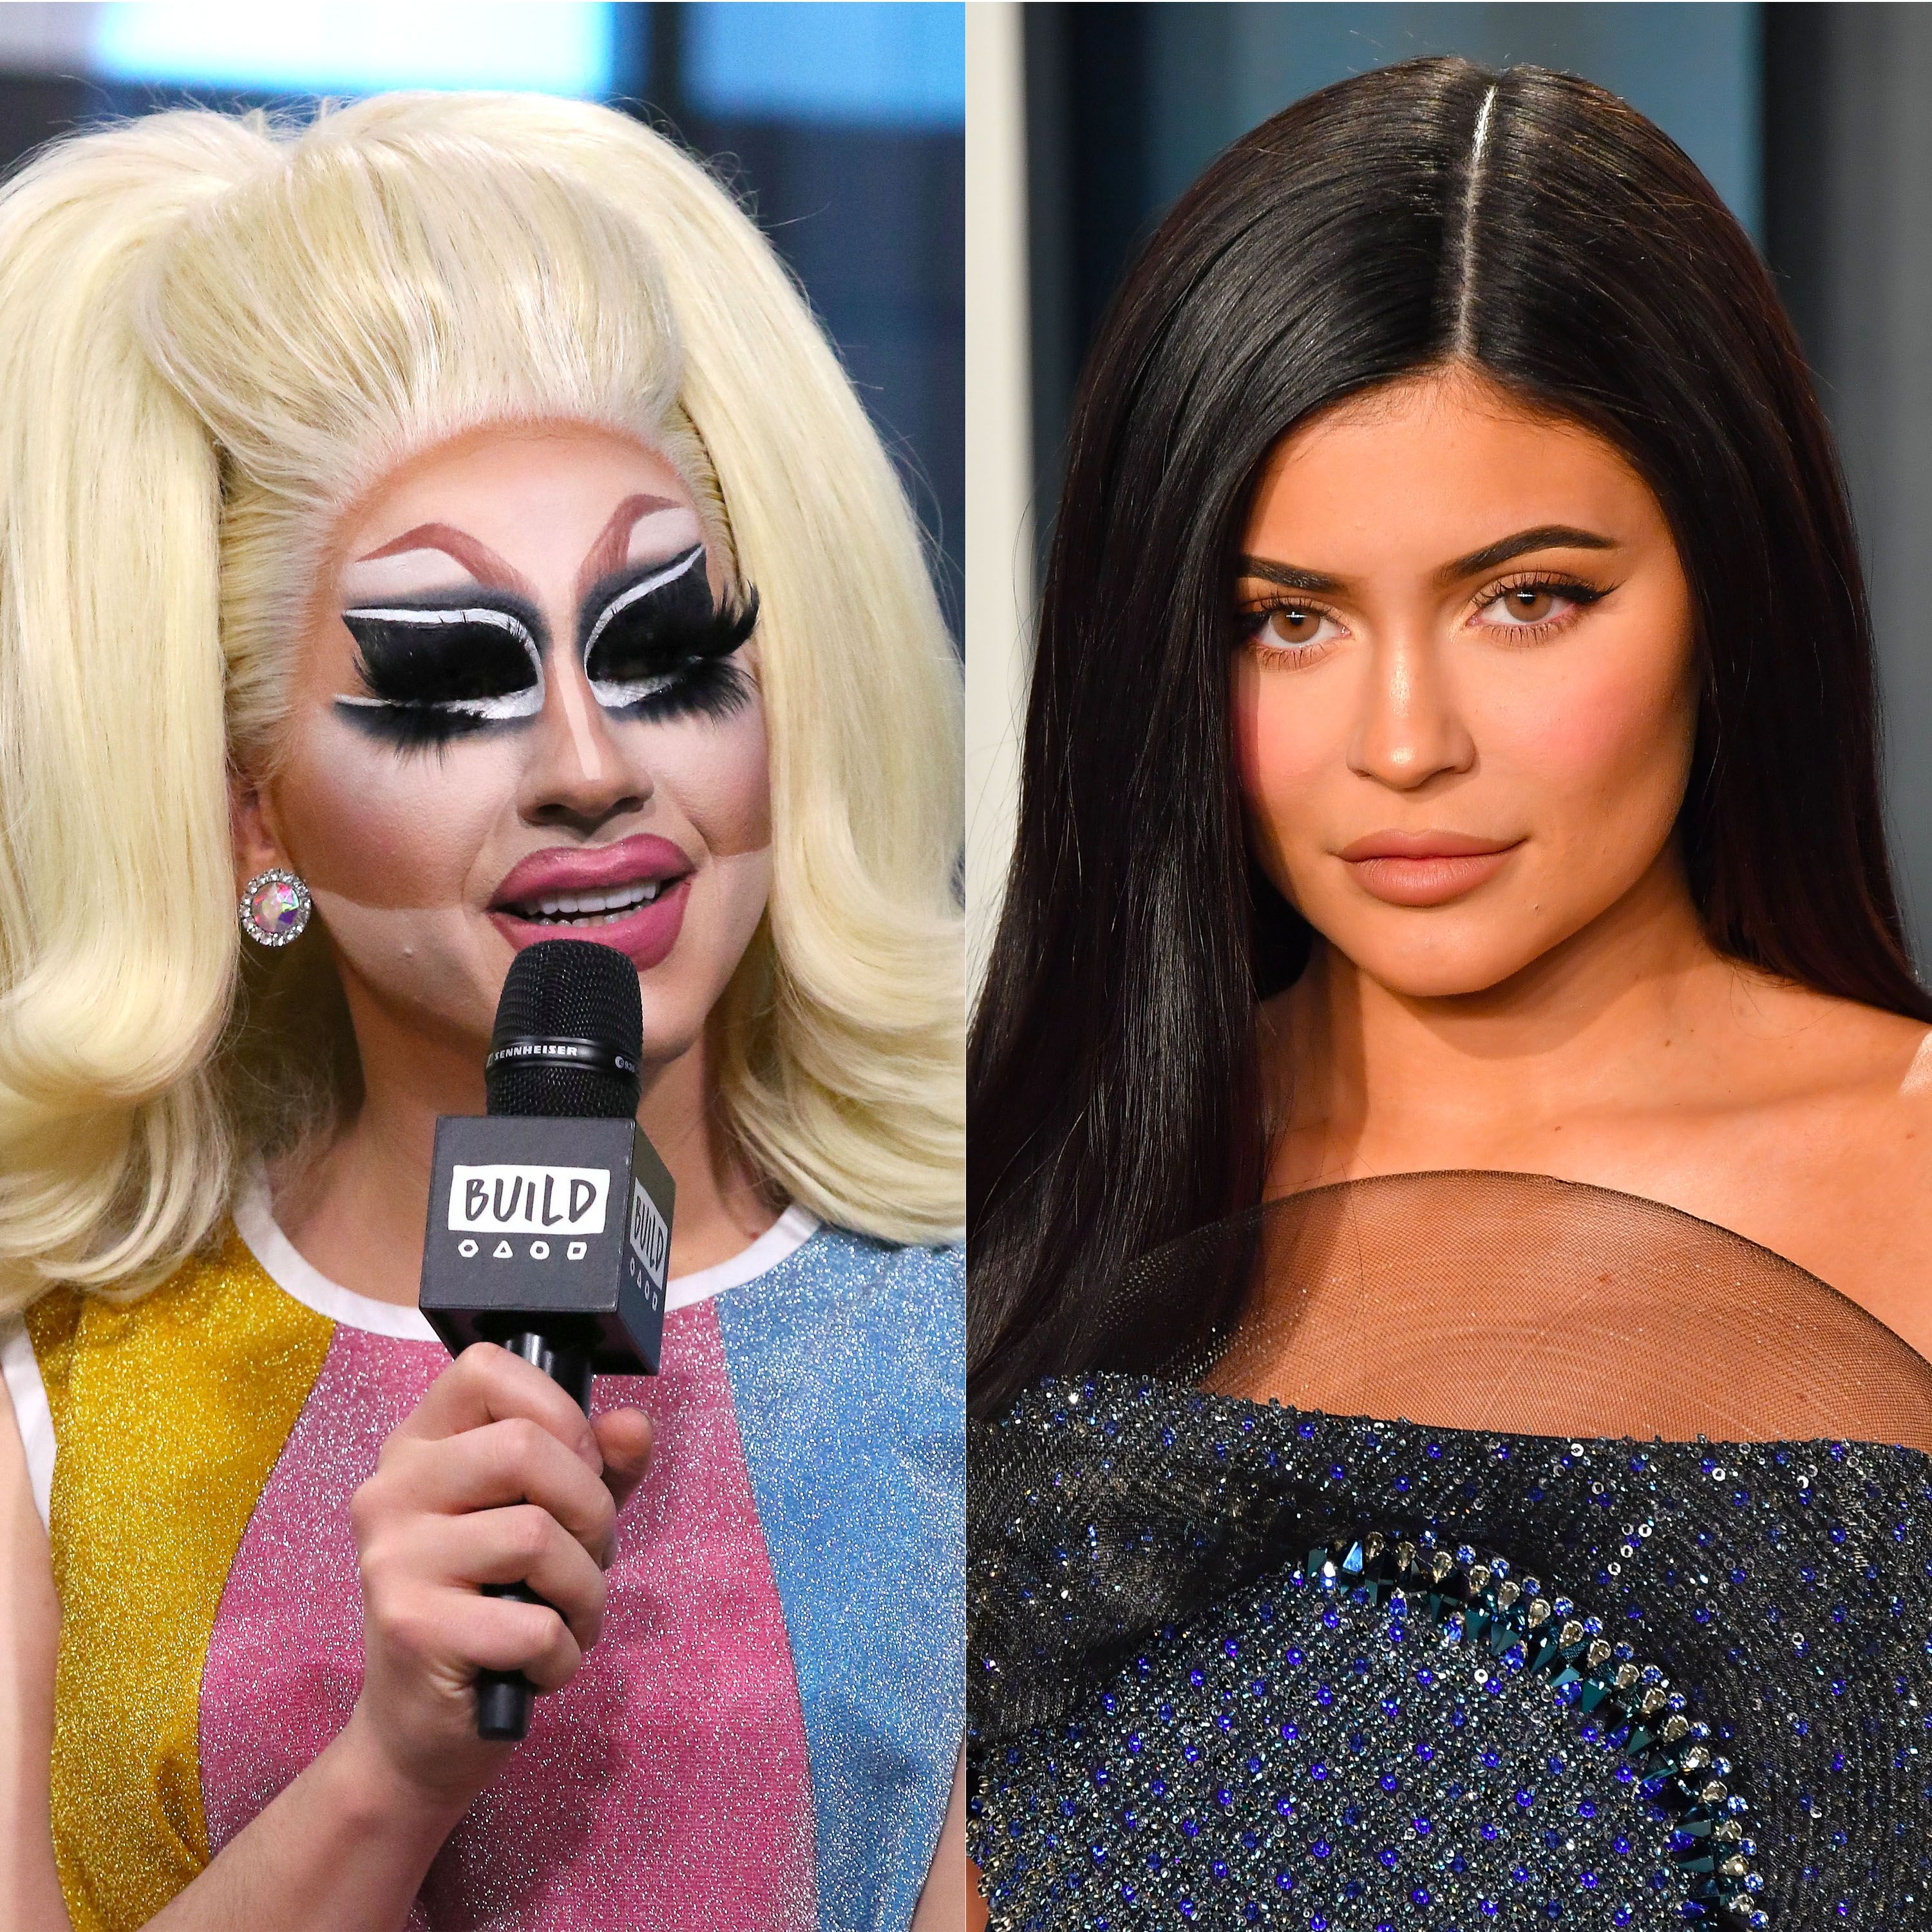 Trixie Mattel responds to claims that Kylie Jenner copied her lip gloss packaging hq pic